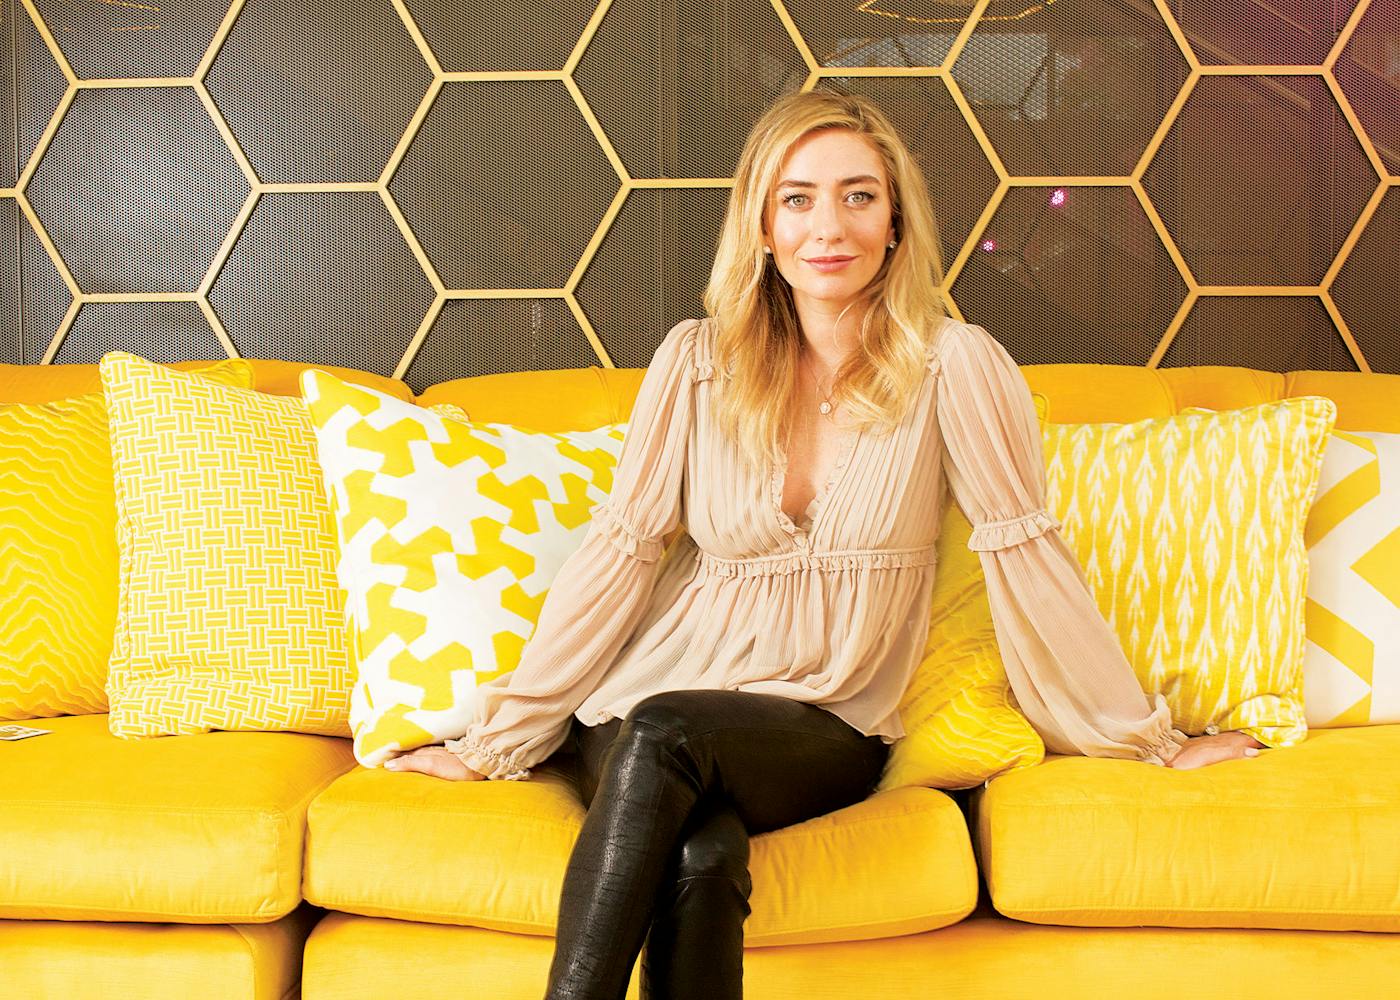 Skinny Teen Girl Fuck - How Whitney Wolfe Herd Changed the Dating Game â€“ Texas Monthly